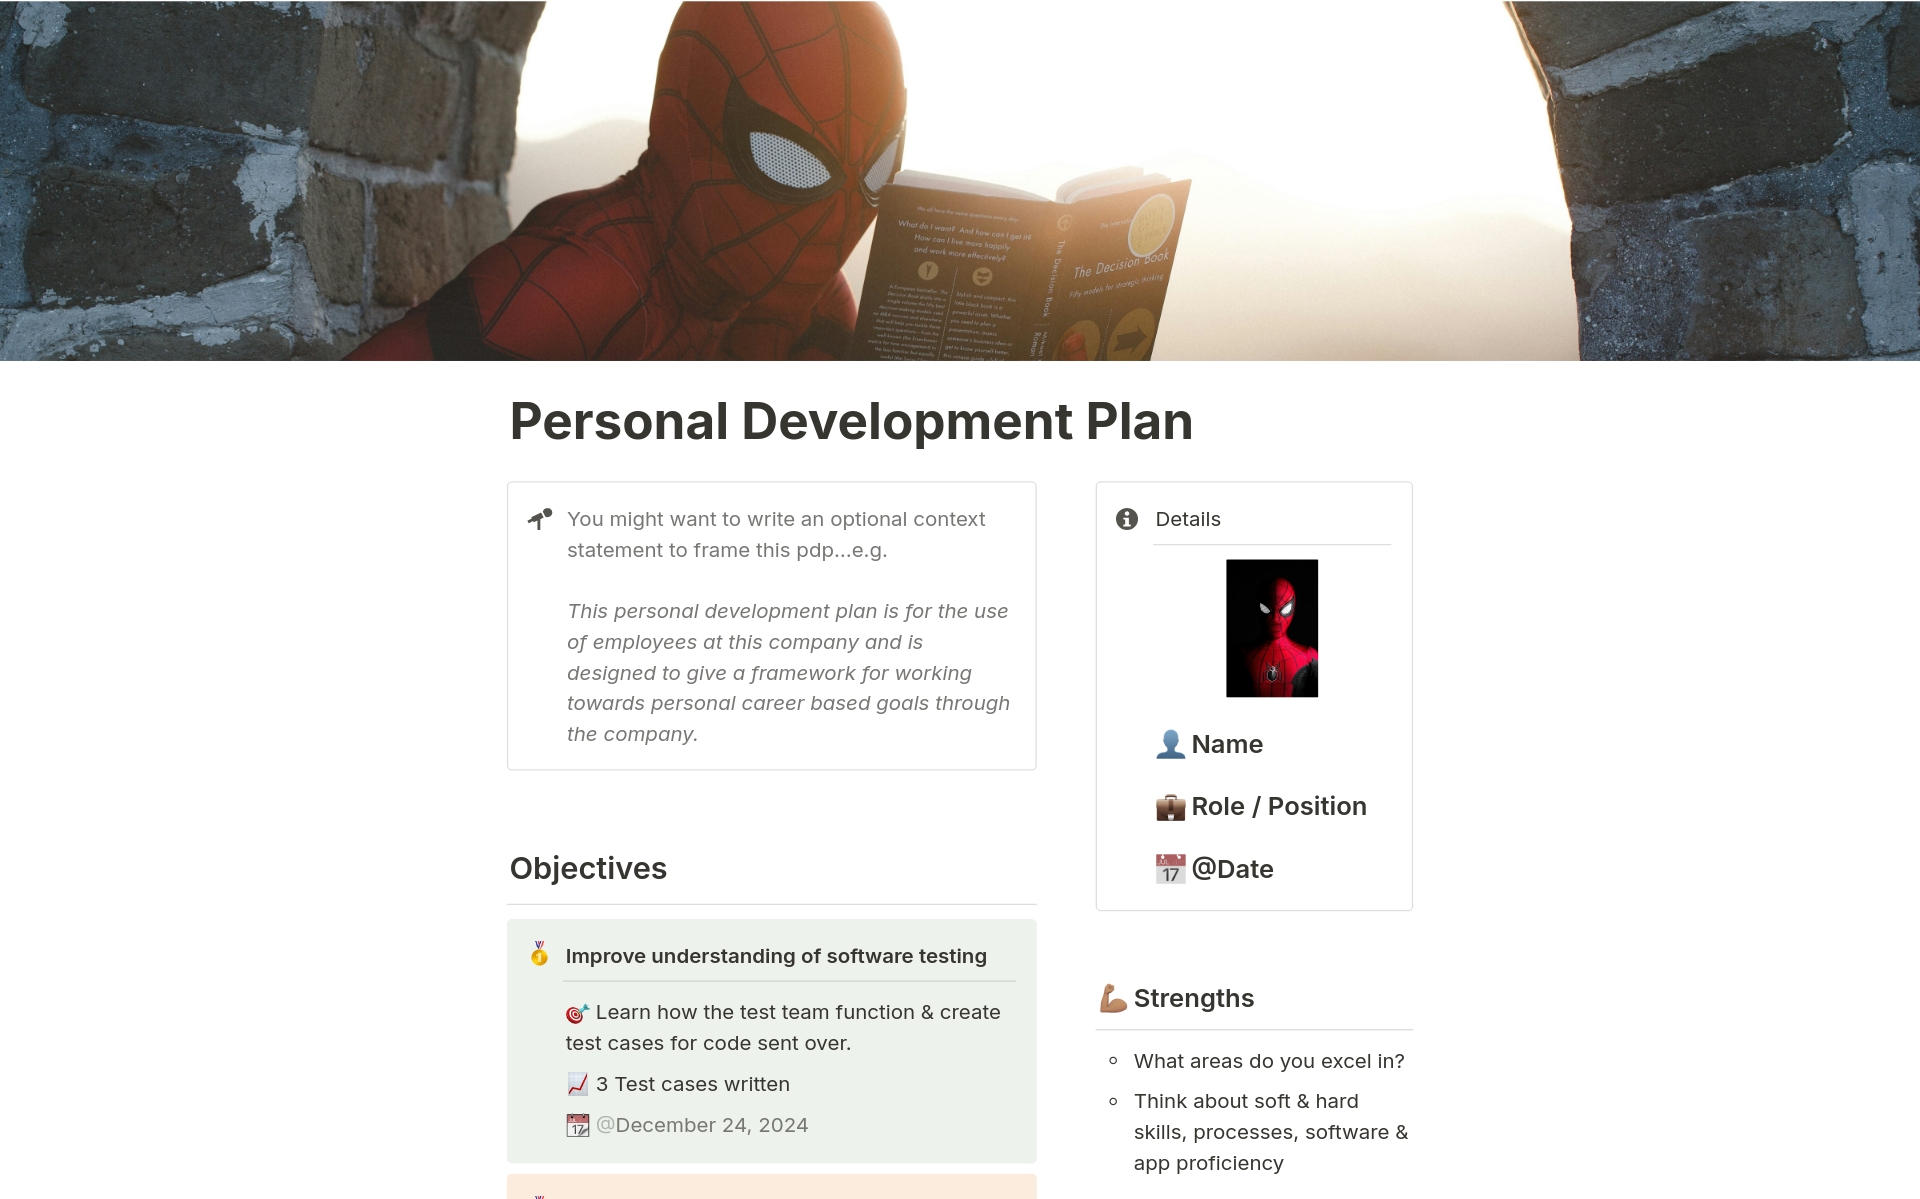 This free personal development plan provides a clean and simple framework for quickly creating a PDP within a business, or just for personal needs.